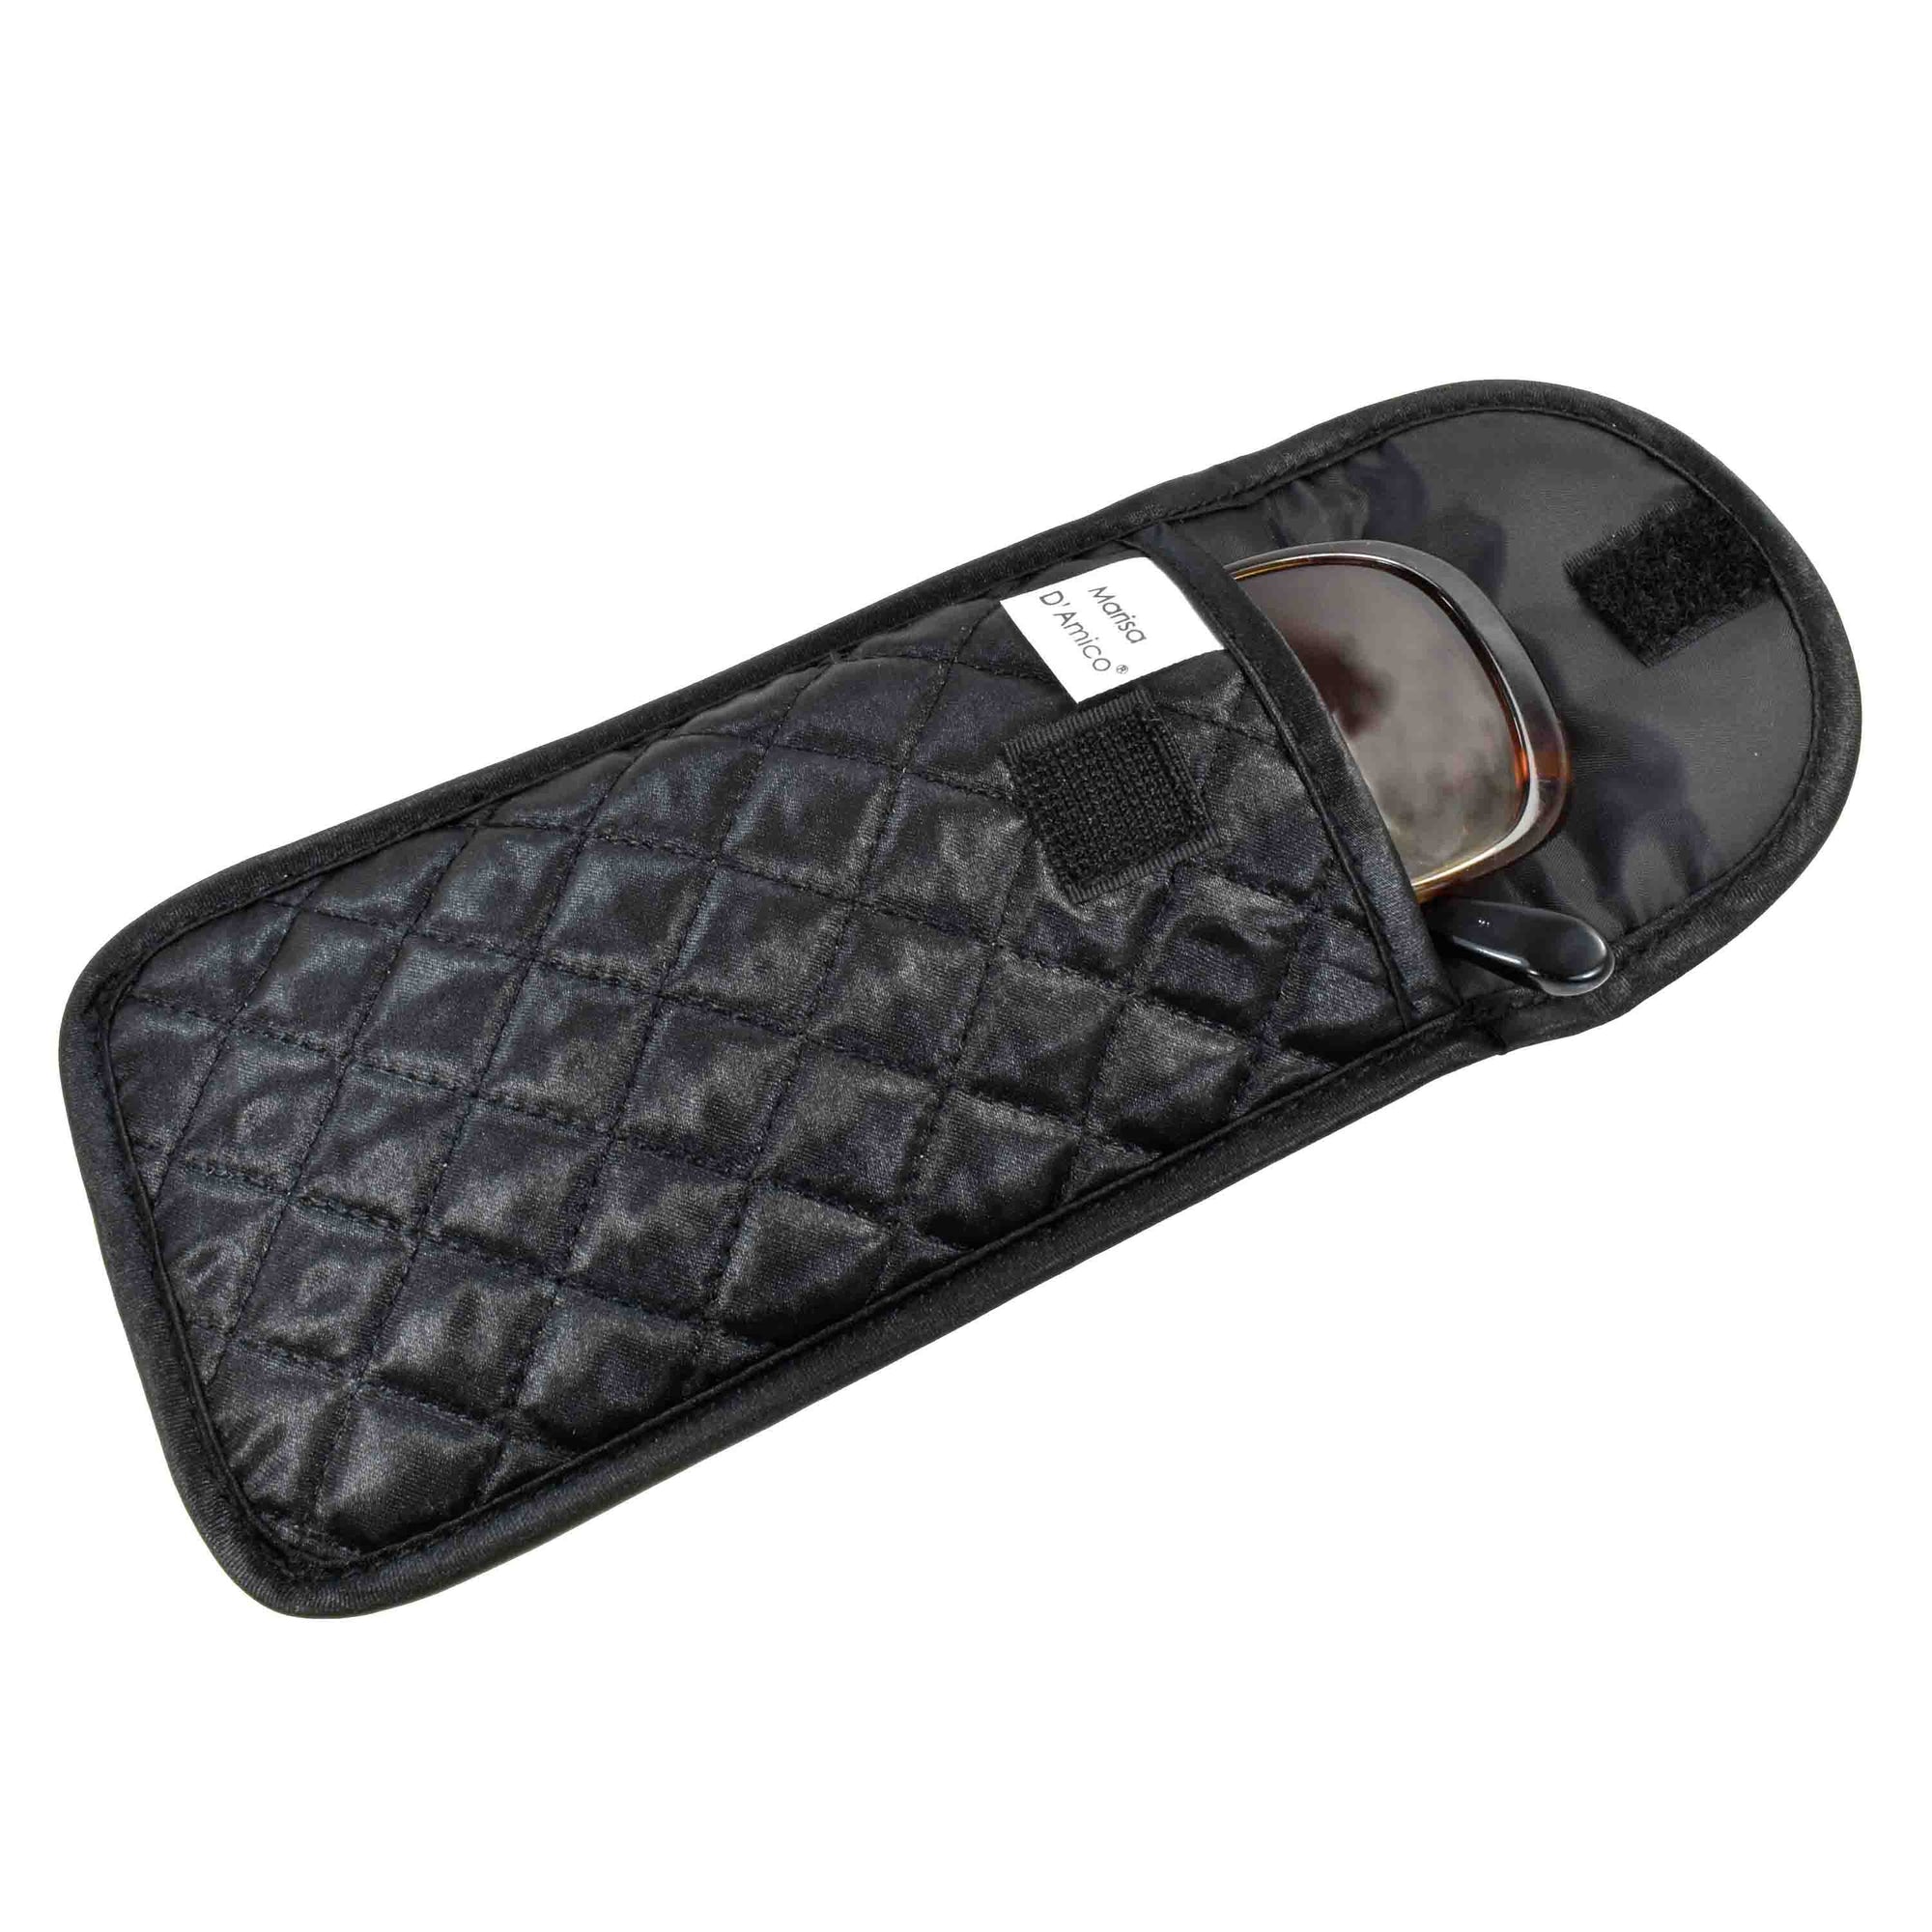 Quilted Satin Soft Eyeglass Pouch with Velcro Flap Closure in Black, Open View